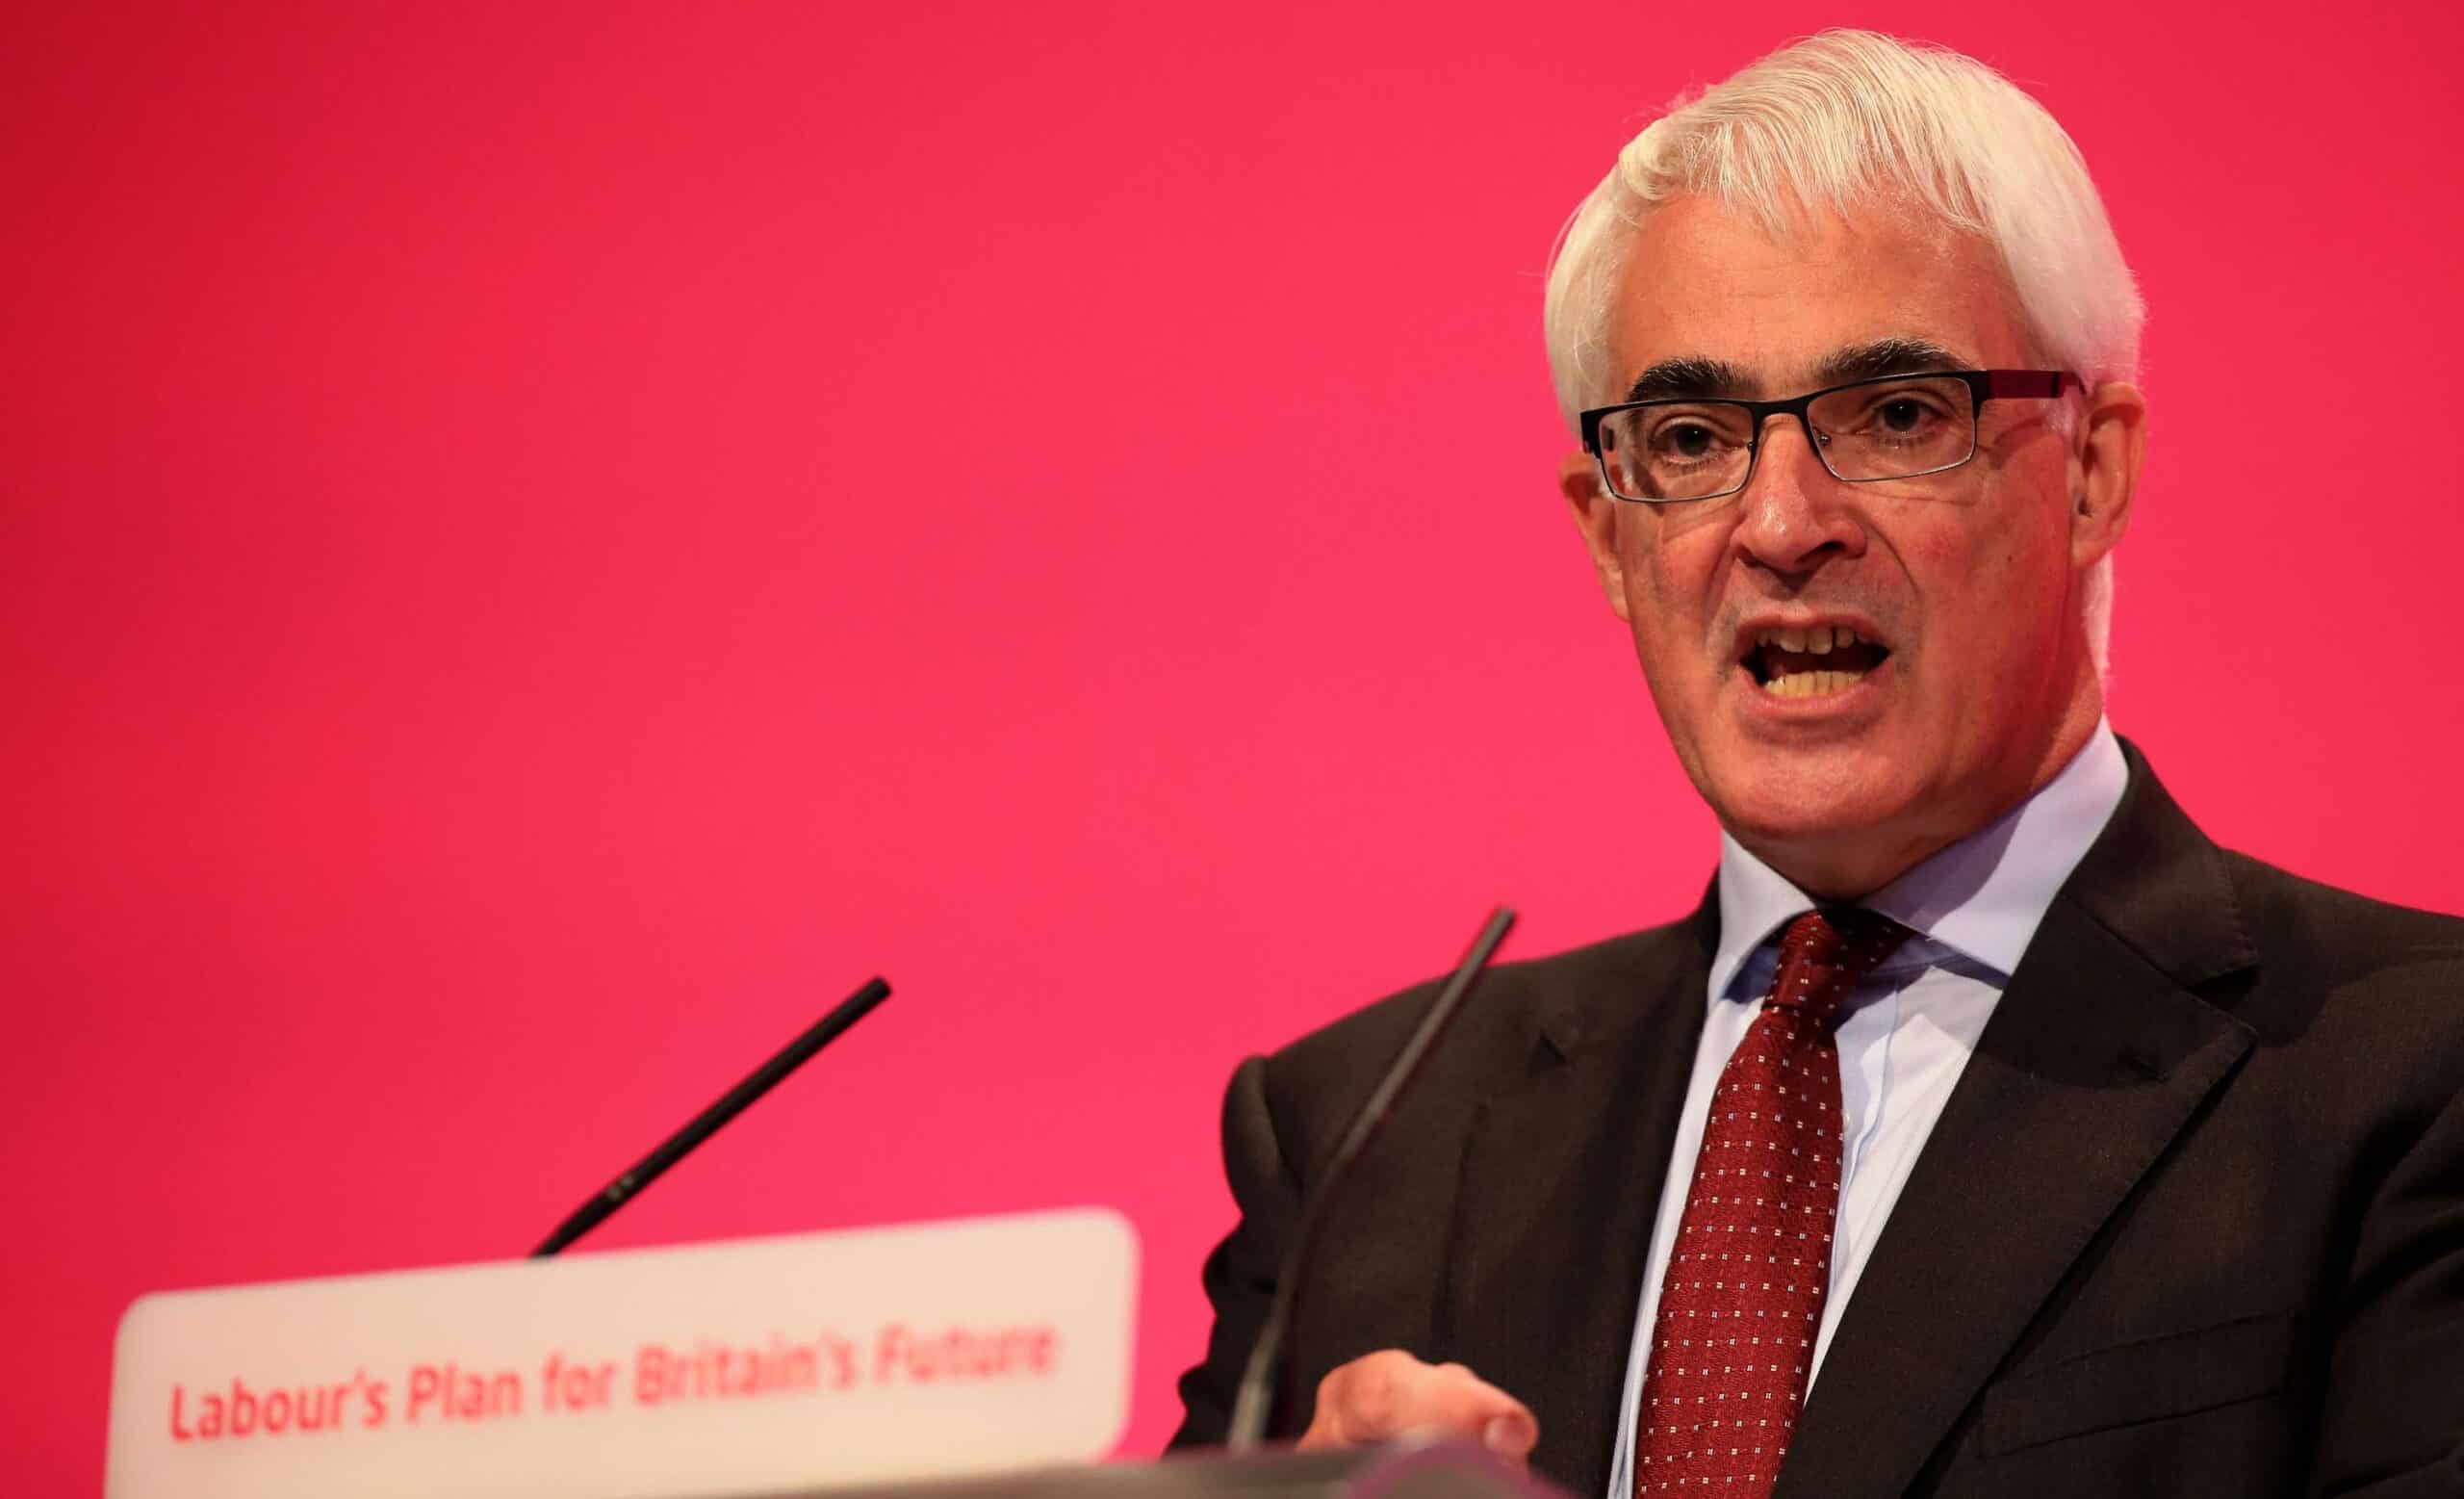 Former chancellor Alistair Darling dies aged 70